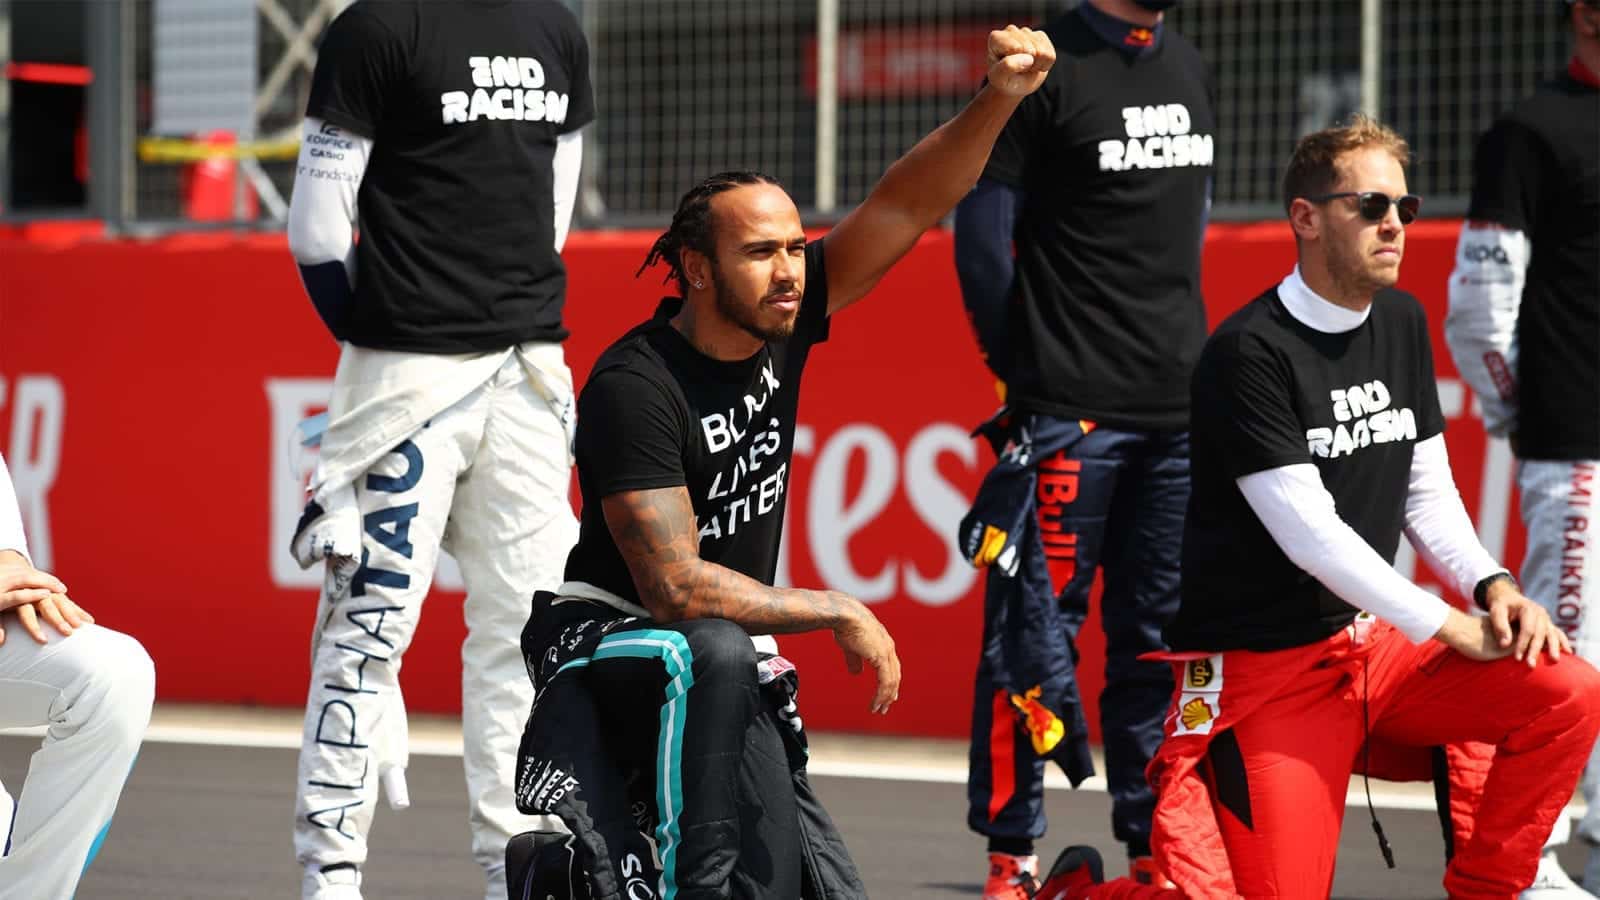 NORTHAMPTON, ENGLAND - AUGUST 09: Lewis Hamilton of Great Britain and Mercedes GP takes a knee on the grid in support of the Black Lives Matter movement prior to the F1 70th Anniversary Grand Prix at Silverstone on August 09, 2020 in Northampton, England. (Photo by Bryn Lennon/Getty Images)